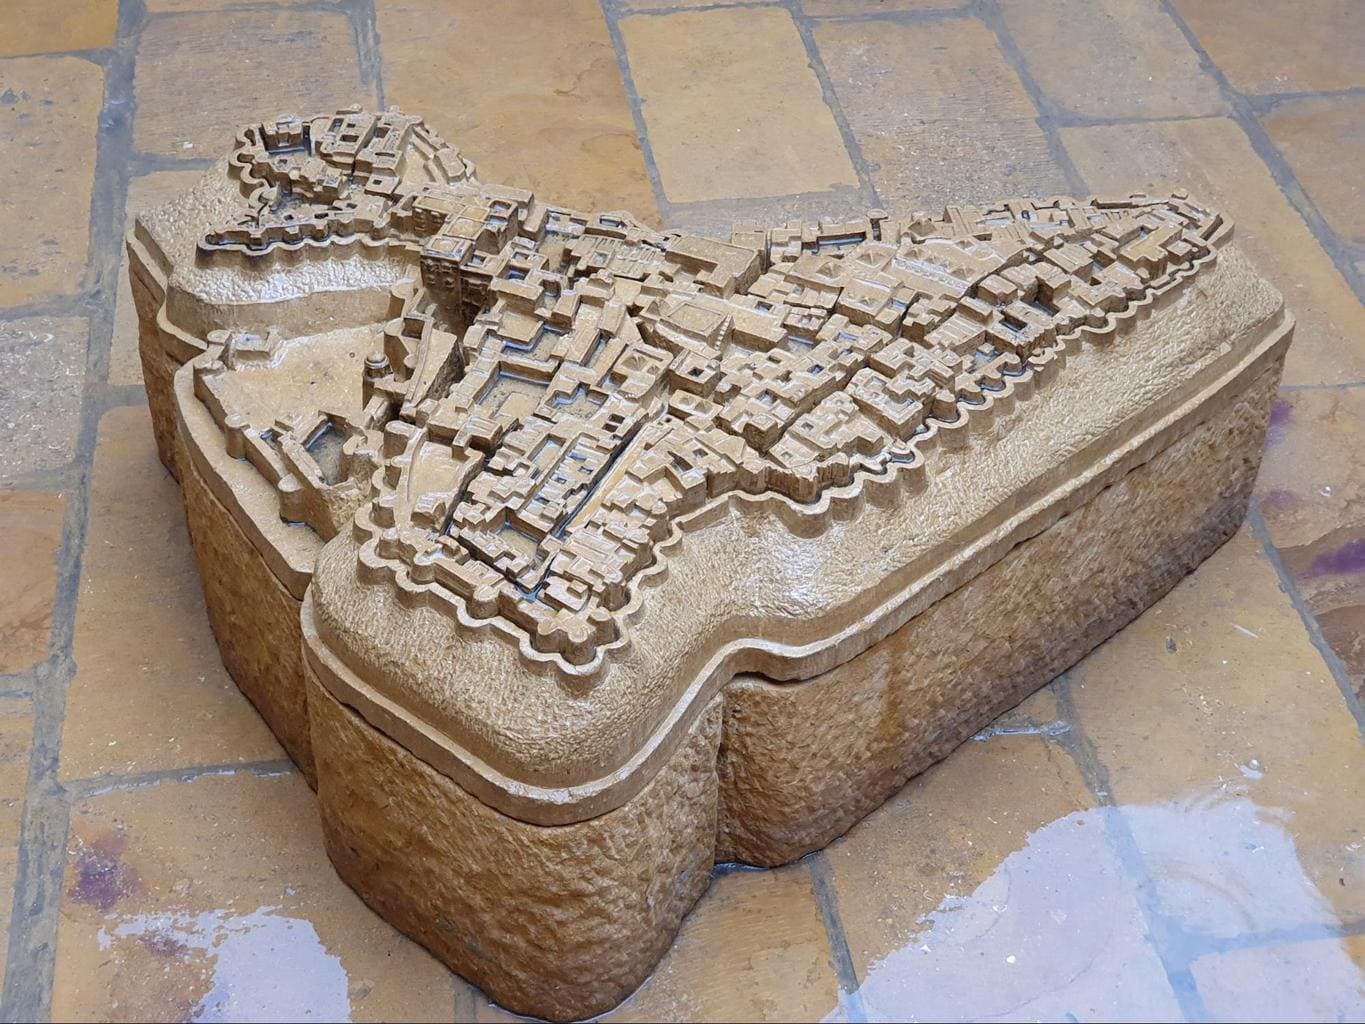 Model of Jaisalmer Fort found at the Fort Museum